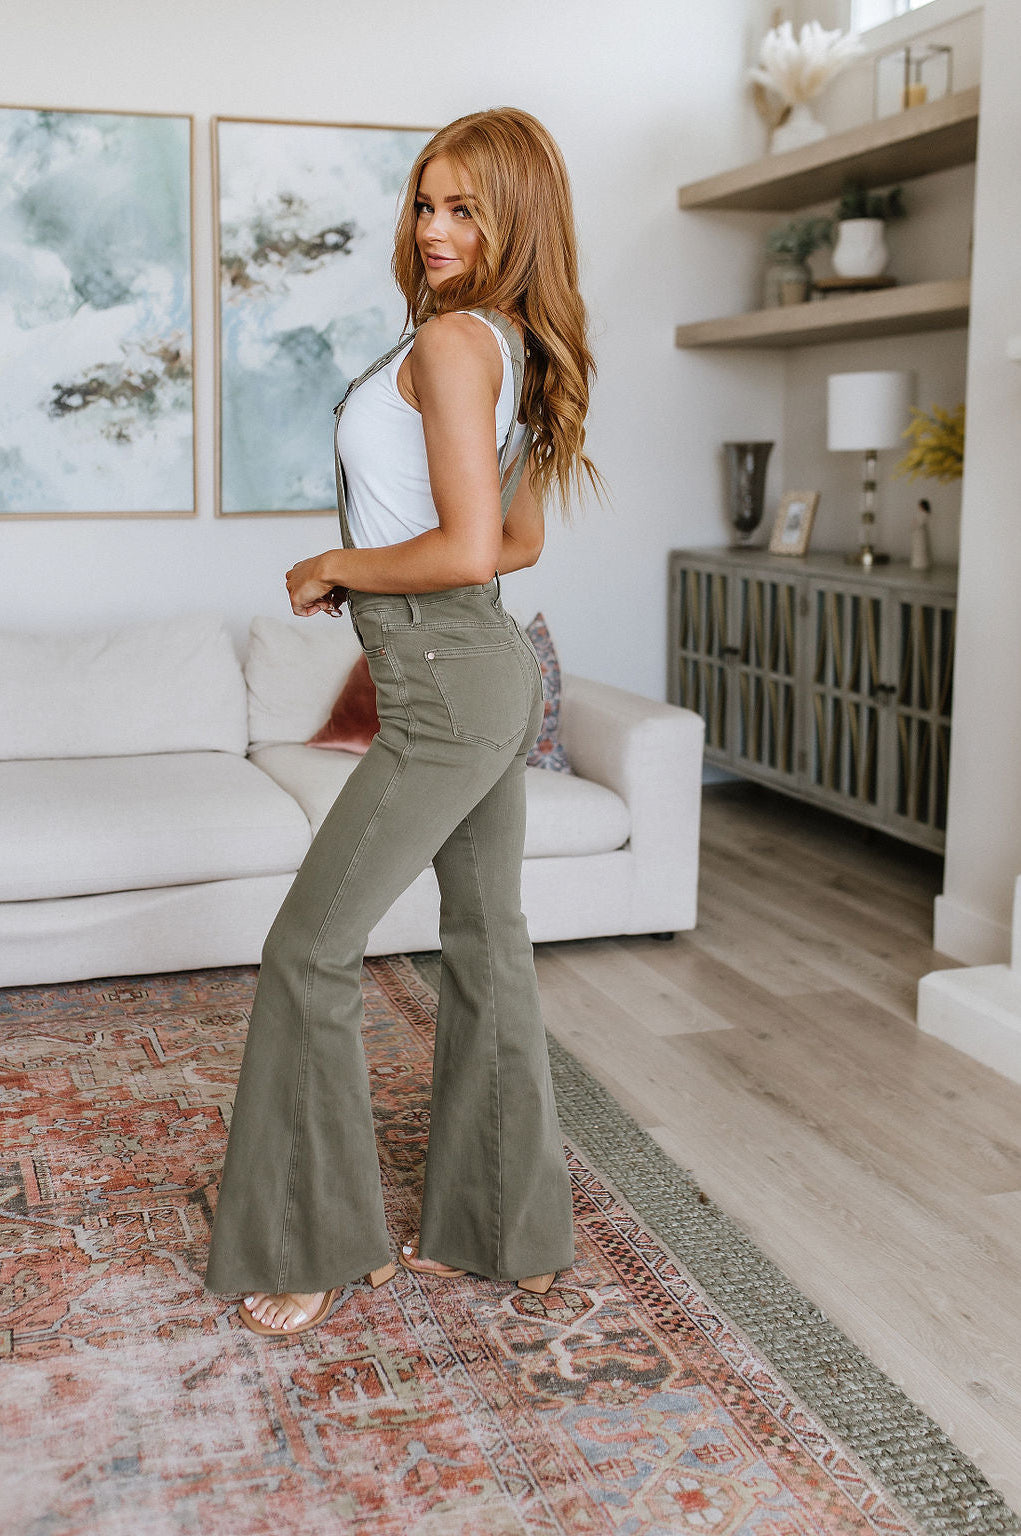 Olivia Control Top Release Hem Overalls in Olive |   |  Casual Chic Boutique